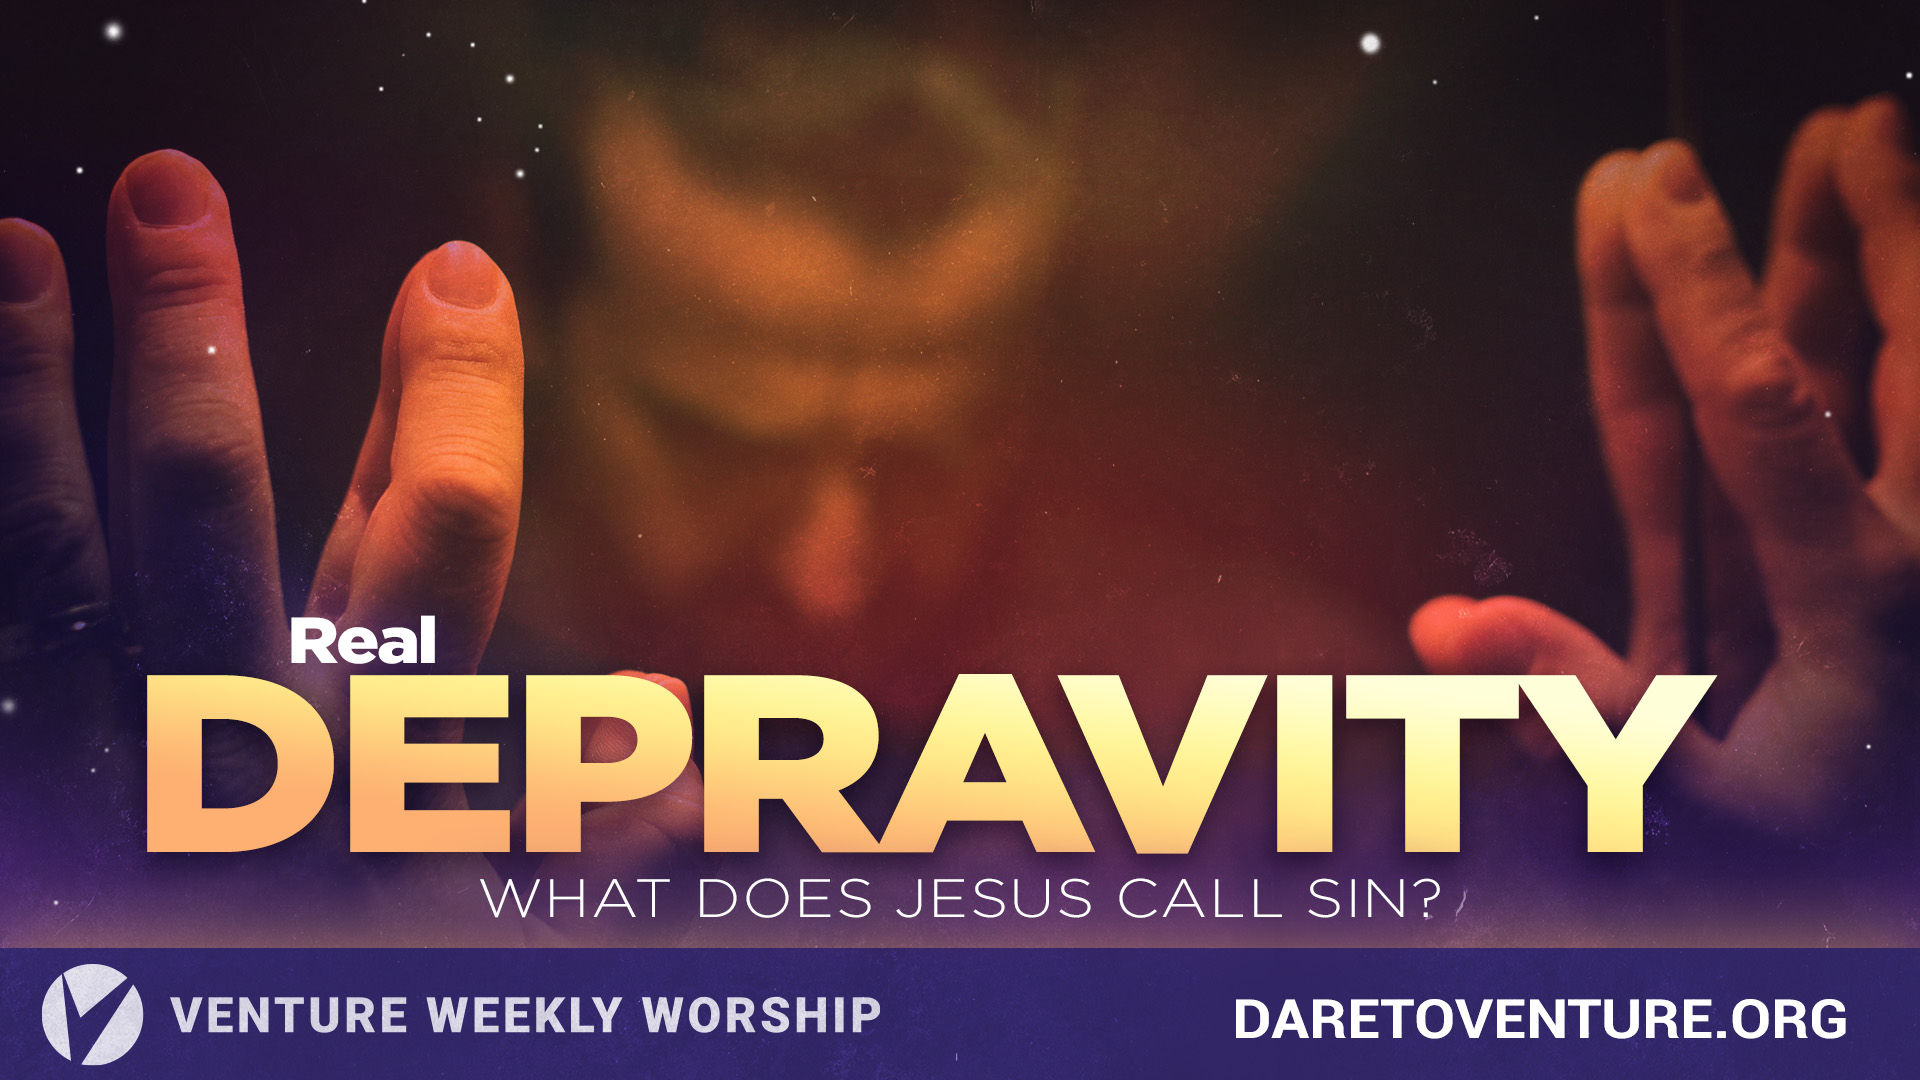 Hope Emerges: Depravity - What Does God Call Sin?